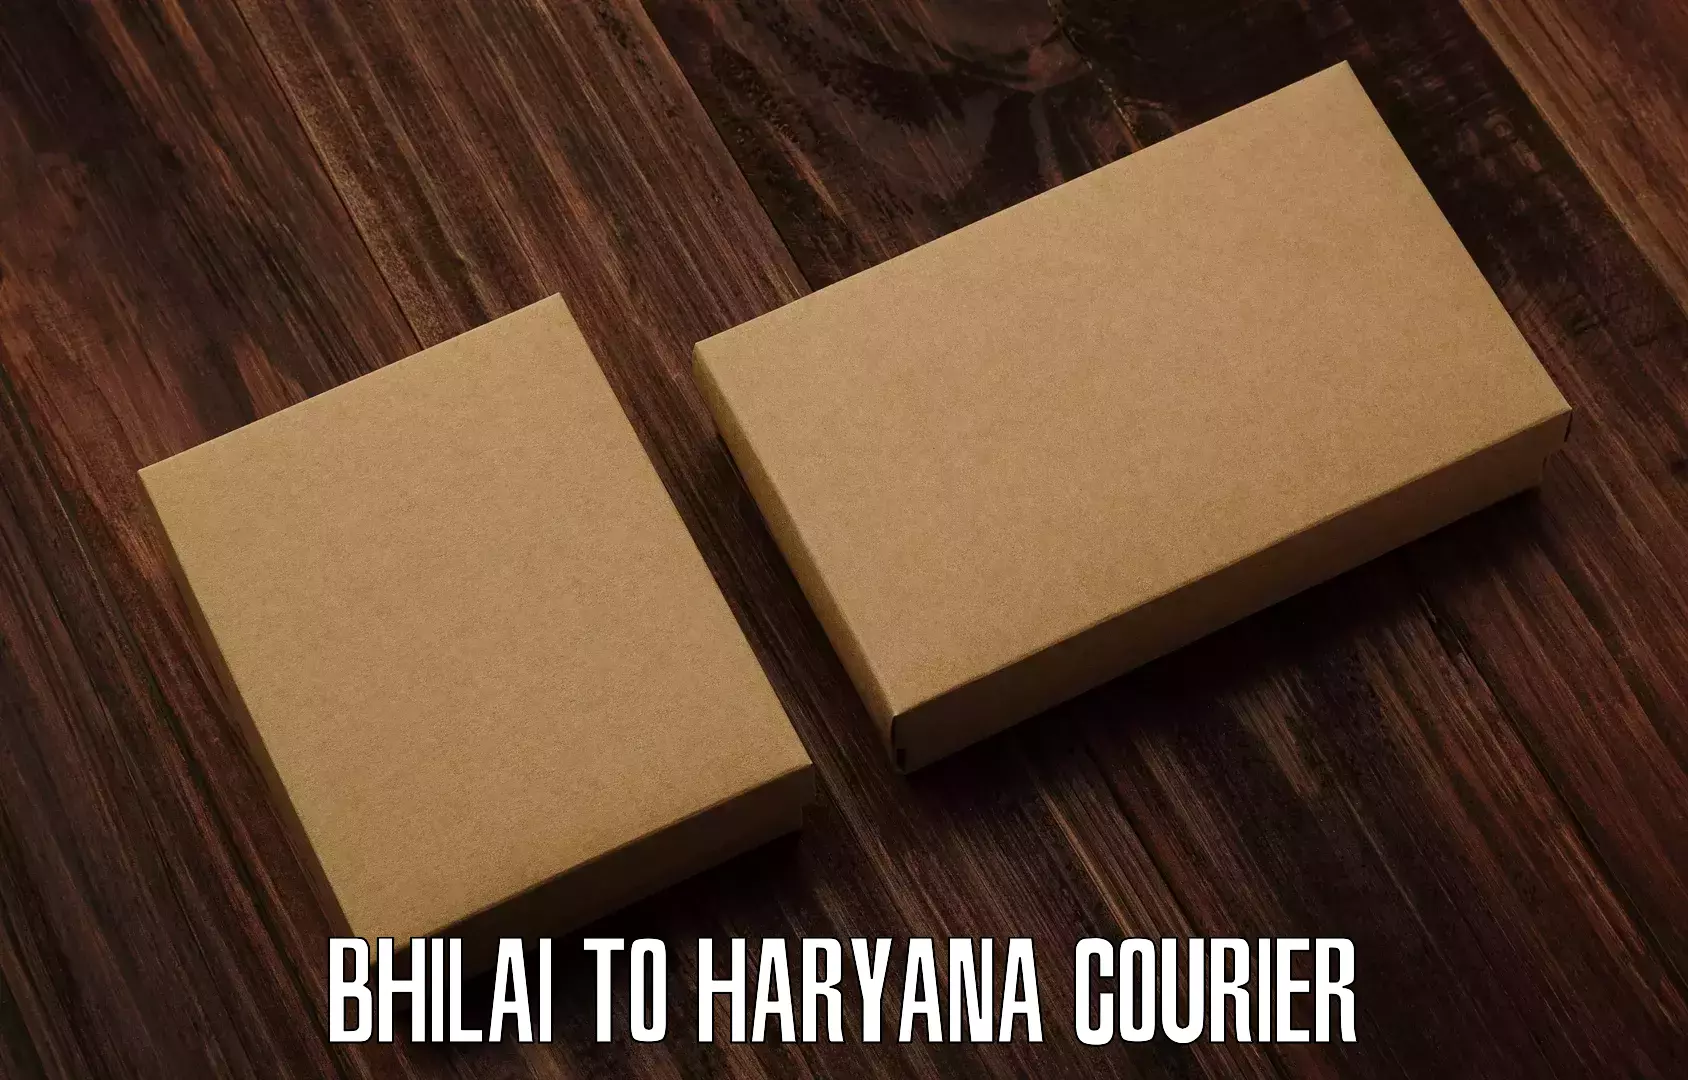 Courier service innovation Bhilai to Bahal